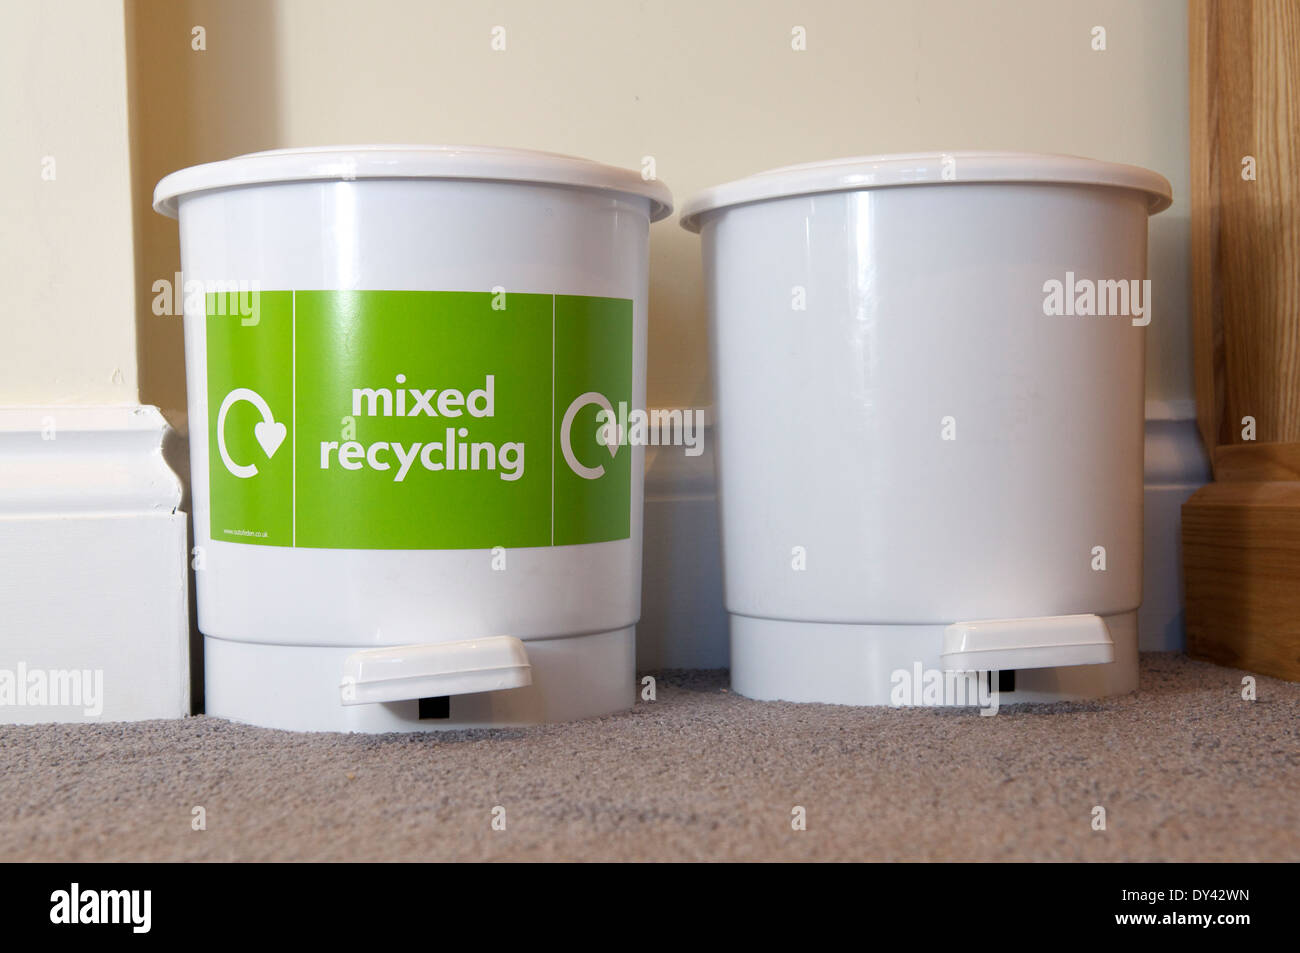 https://c8.alamy.com/comp/DY42WN/pedal-bins-for-recycling-and-rubbish-in-bb-DY42WN.jpg